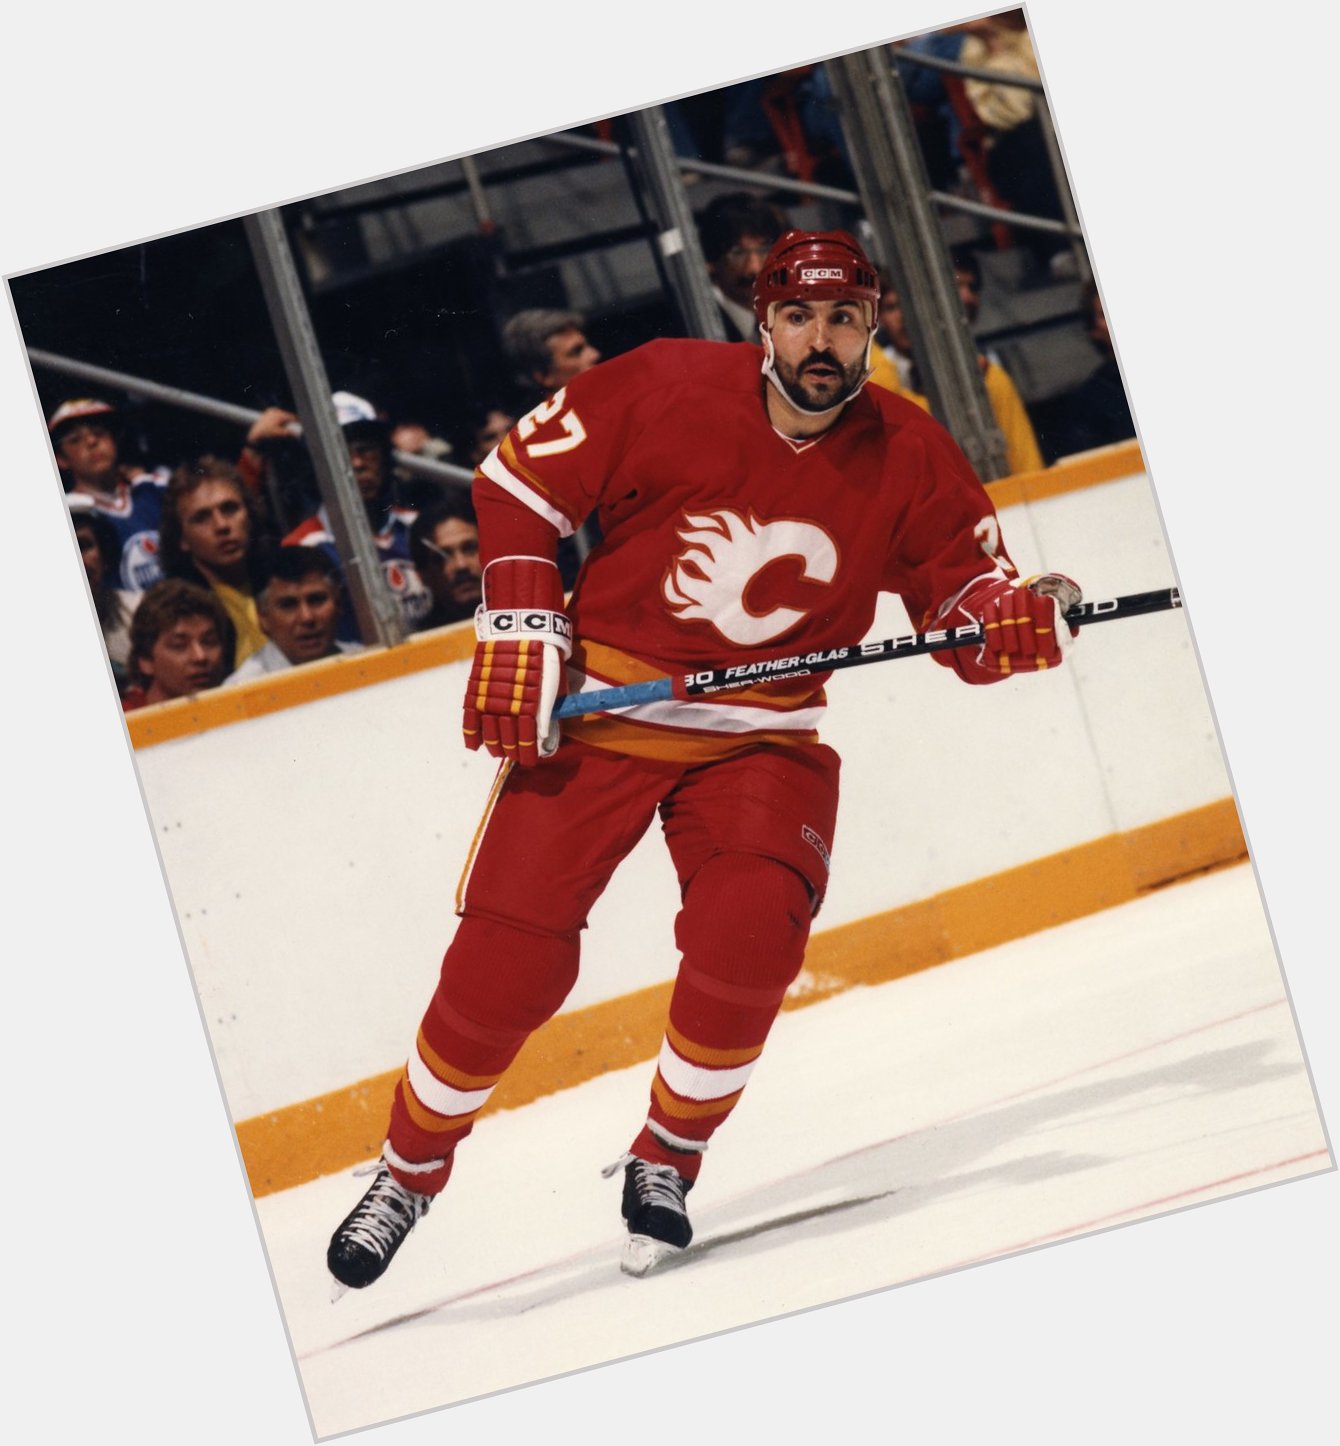 Happy 66th birthday, John Tonelli!

In his 161 games with the he scored 40 goals and posted 116 points! 